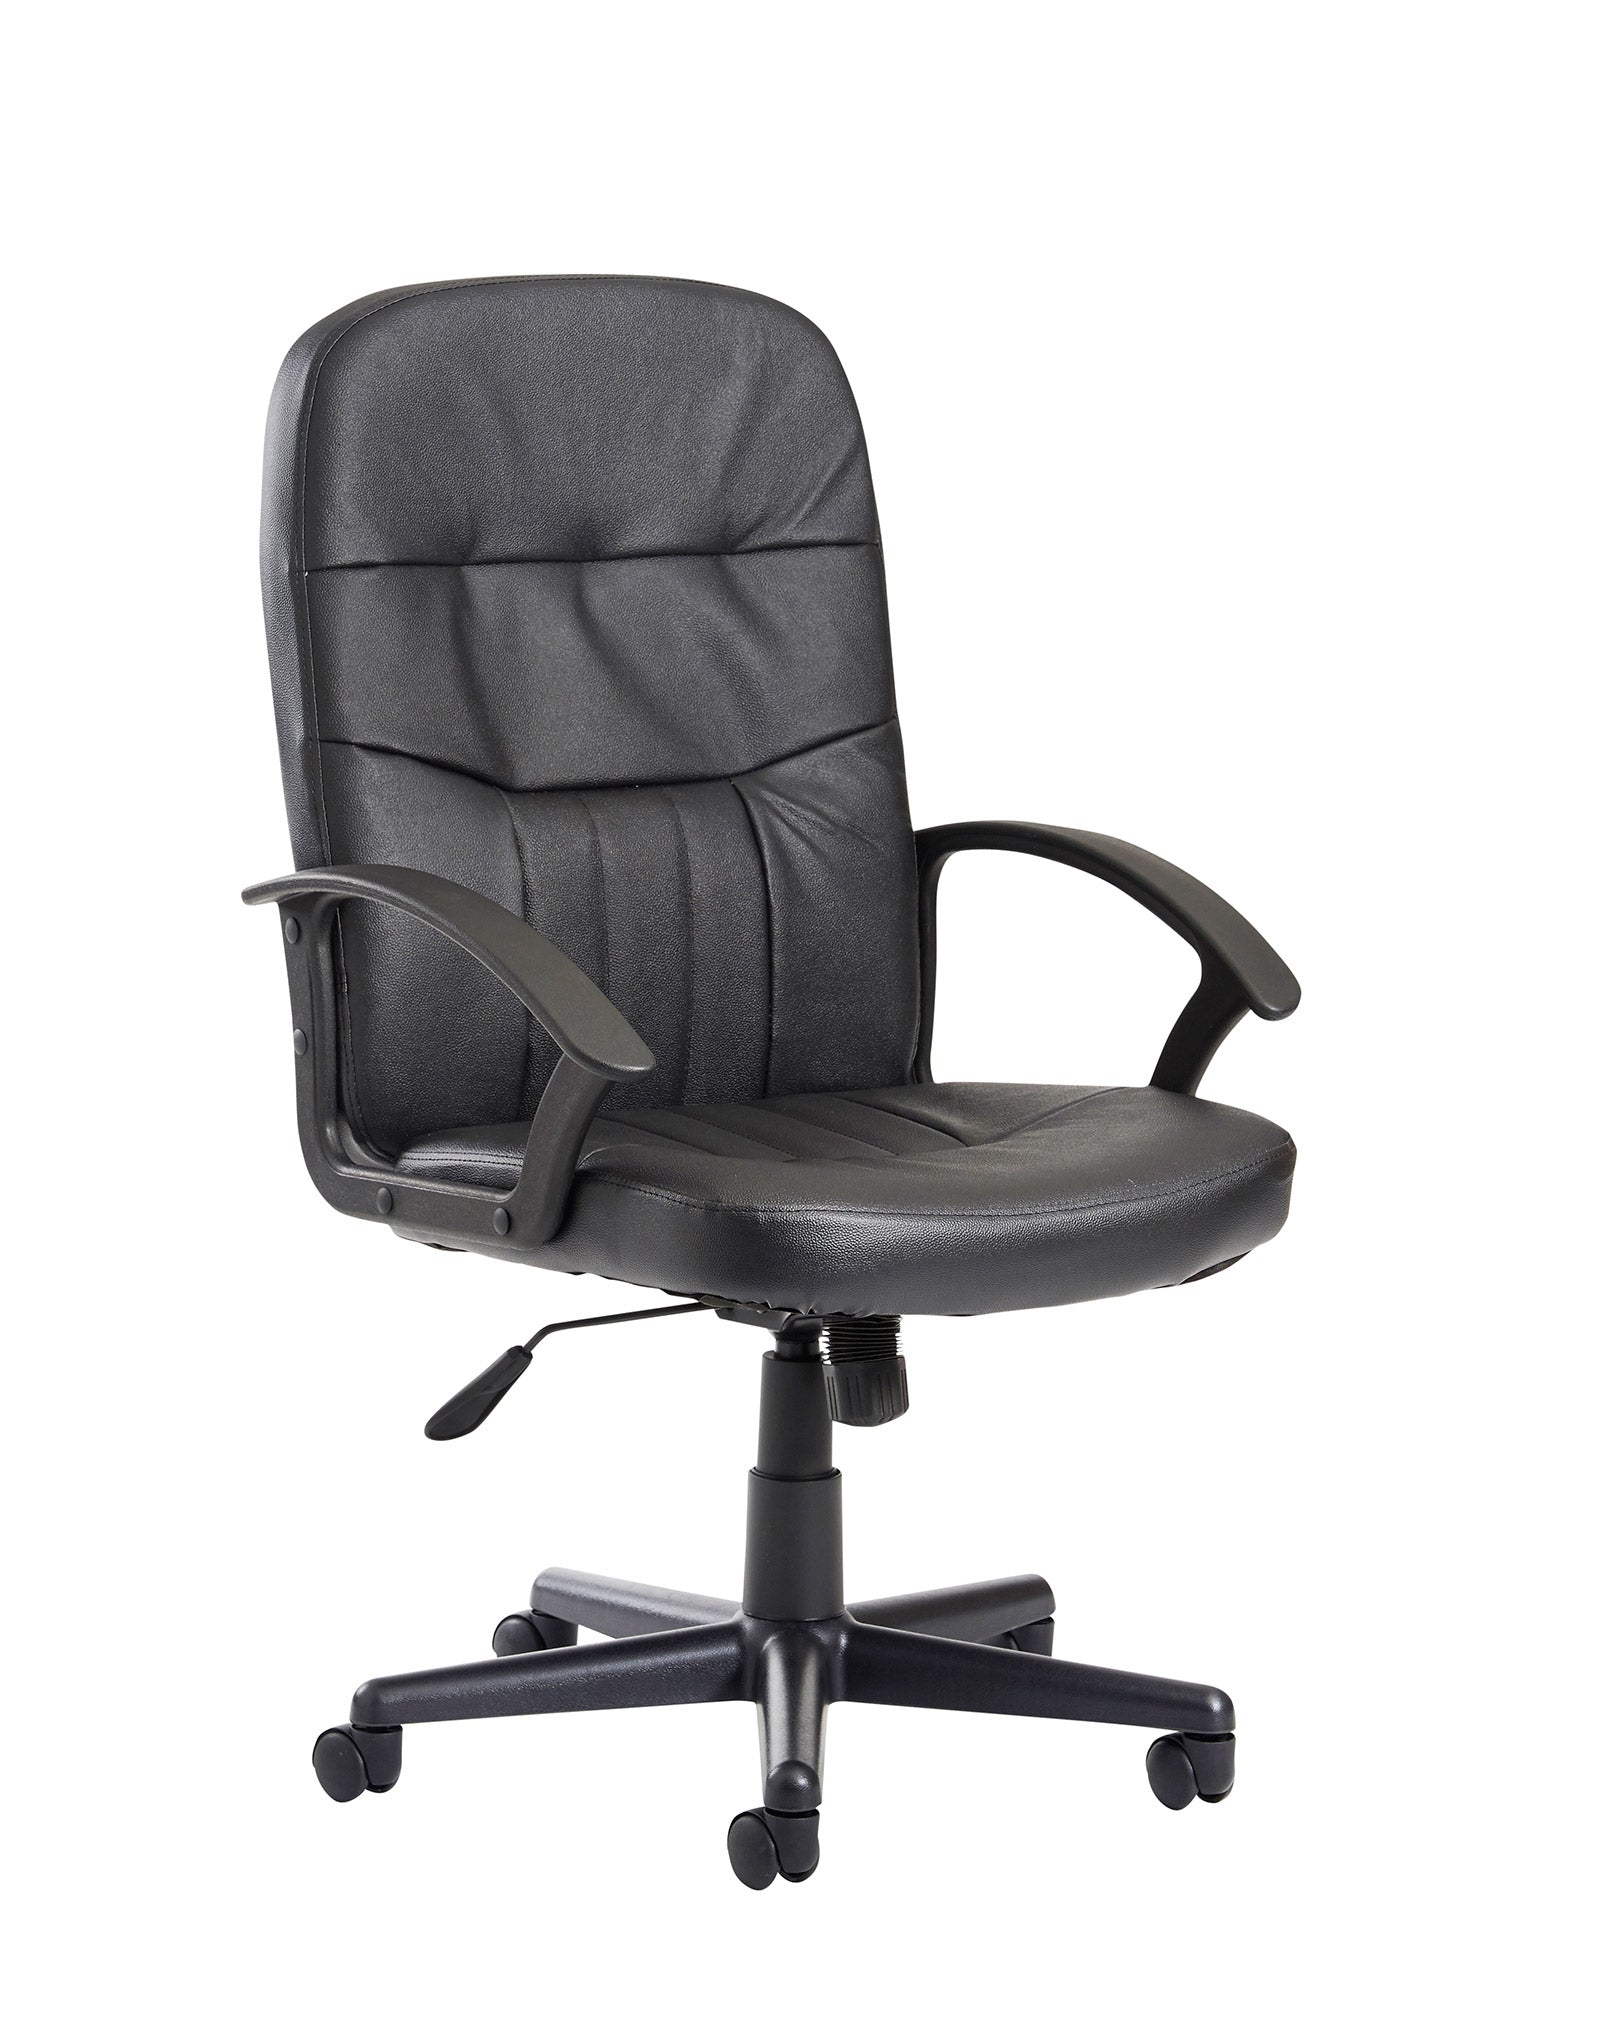 Cavalier High Back Supple Leather Managers Office Chair